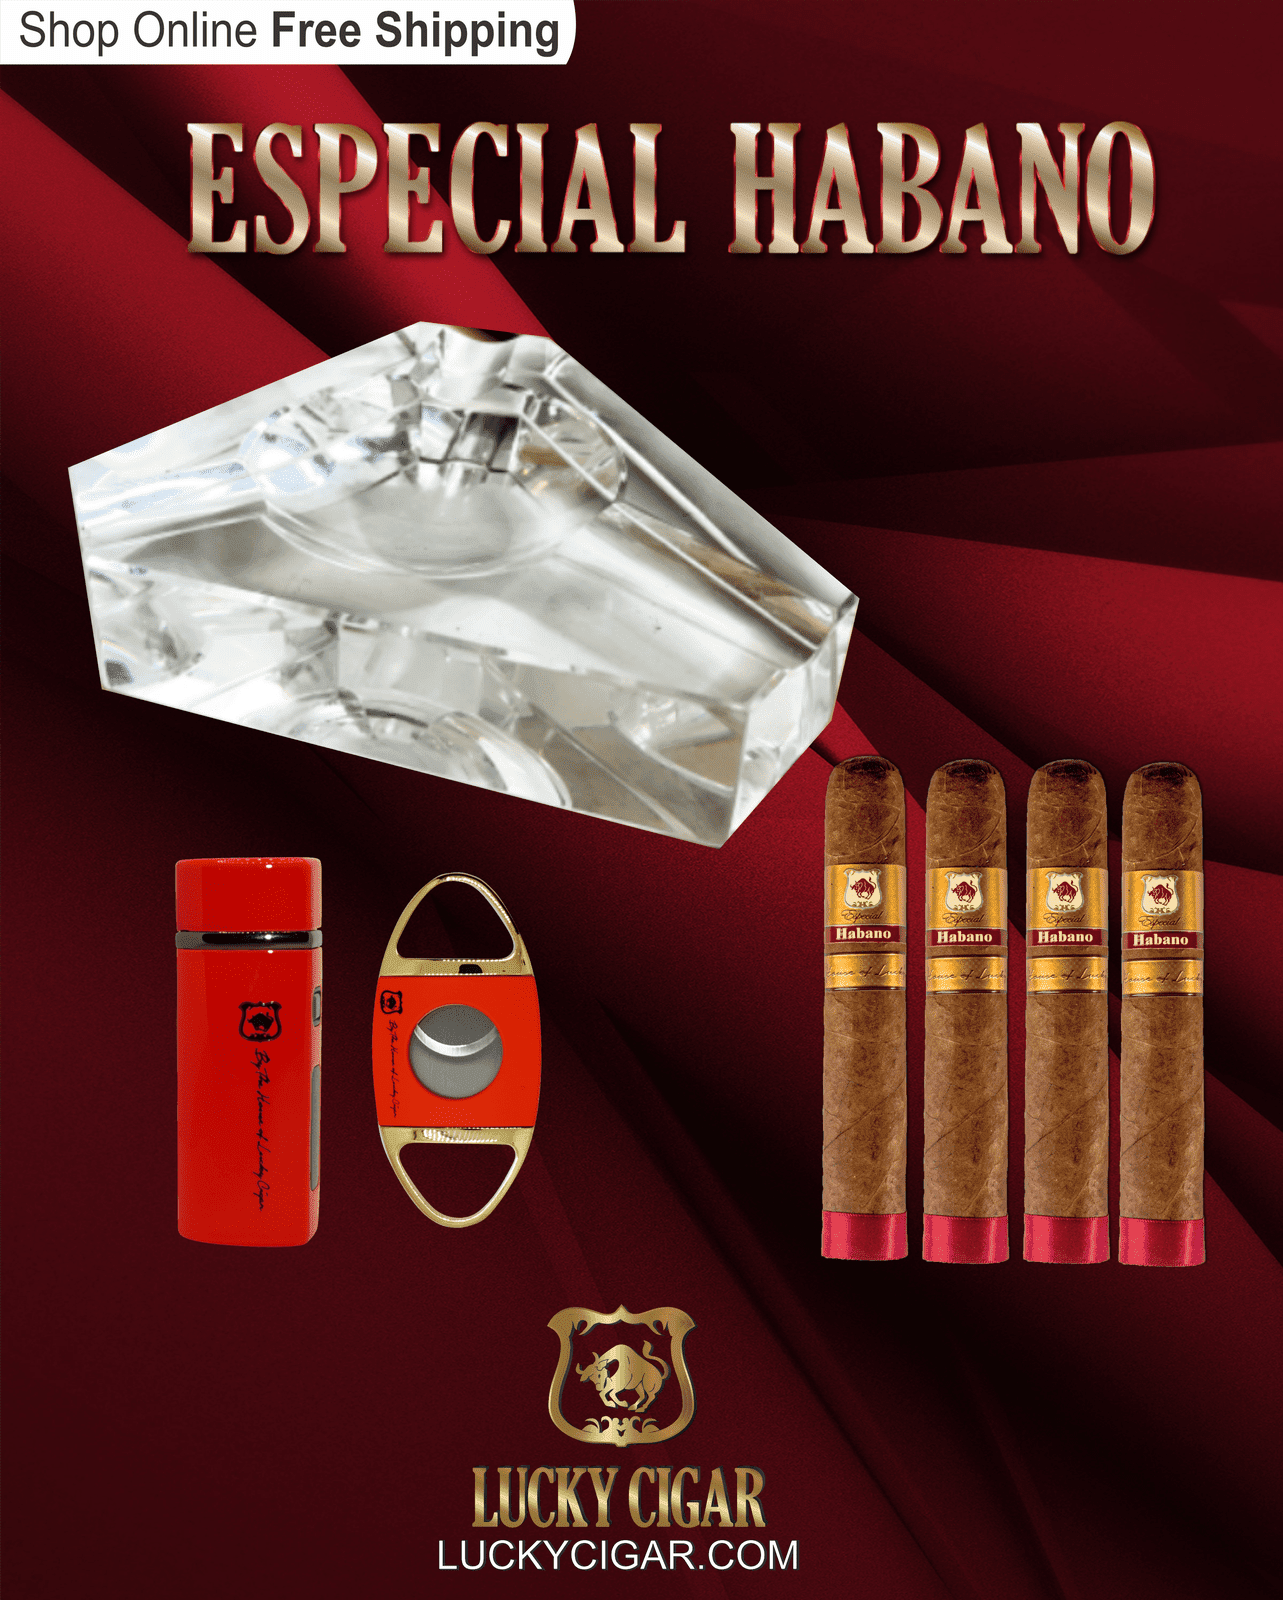 Habano Cigars: Especial Habano by Lucky Cigar: Set of 4 Cigars 4 Toro with Lighter, Cutter, Ashtray